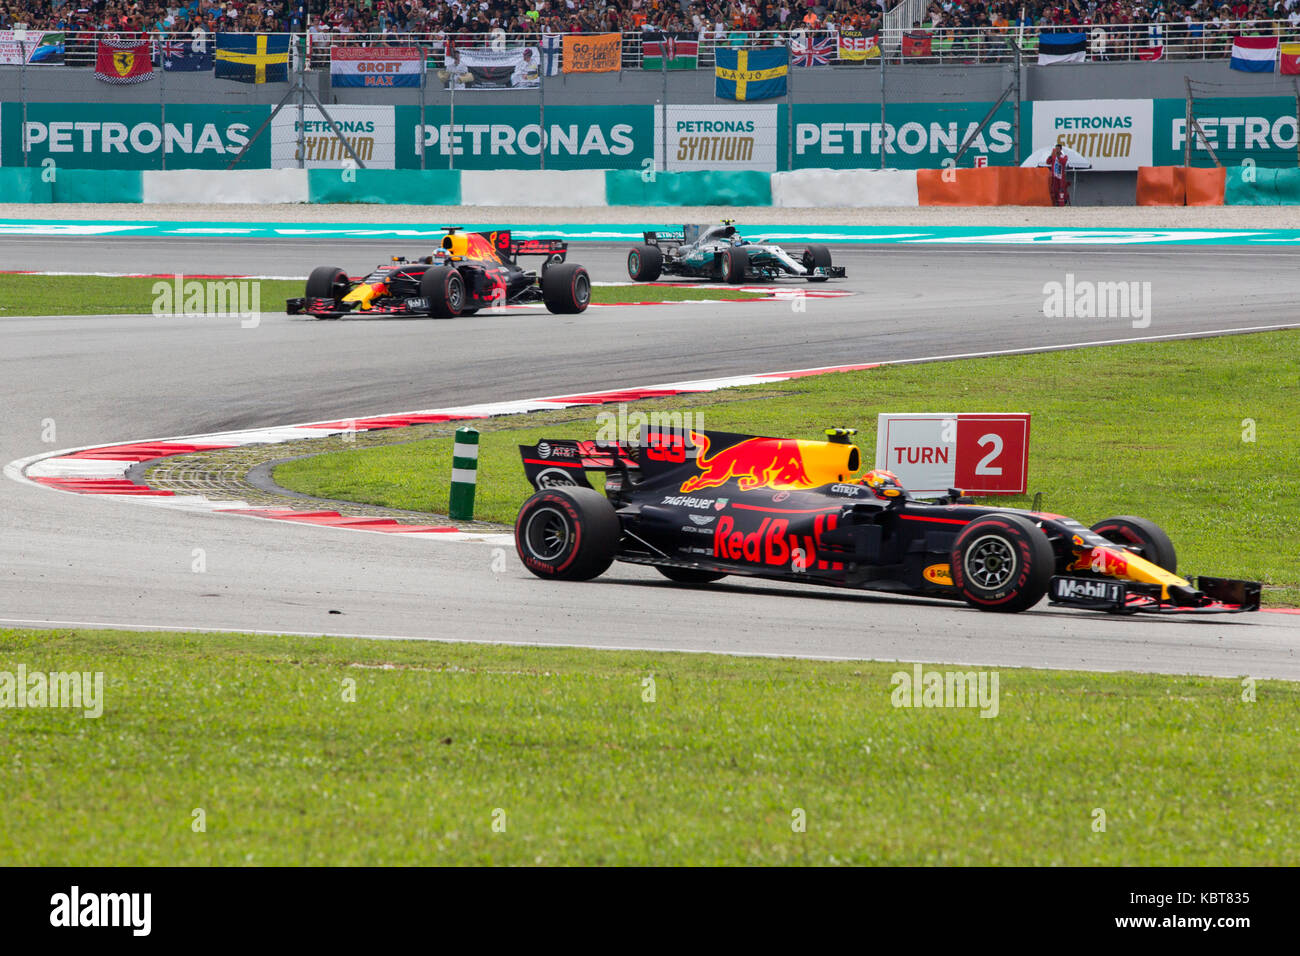 Max Verstappen from RBR TAG Heuer takes lead in the F1 Grand Prix at the Sepang F1 circuit. Verstappen finished the race in the first position. On October 01, 2017 in Kuala Lumpur, Malaysia. Stock Photo